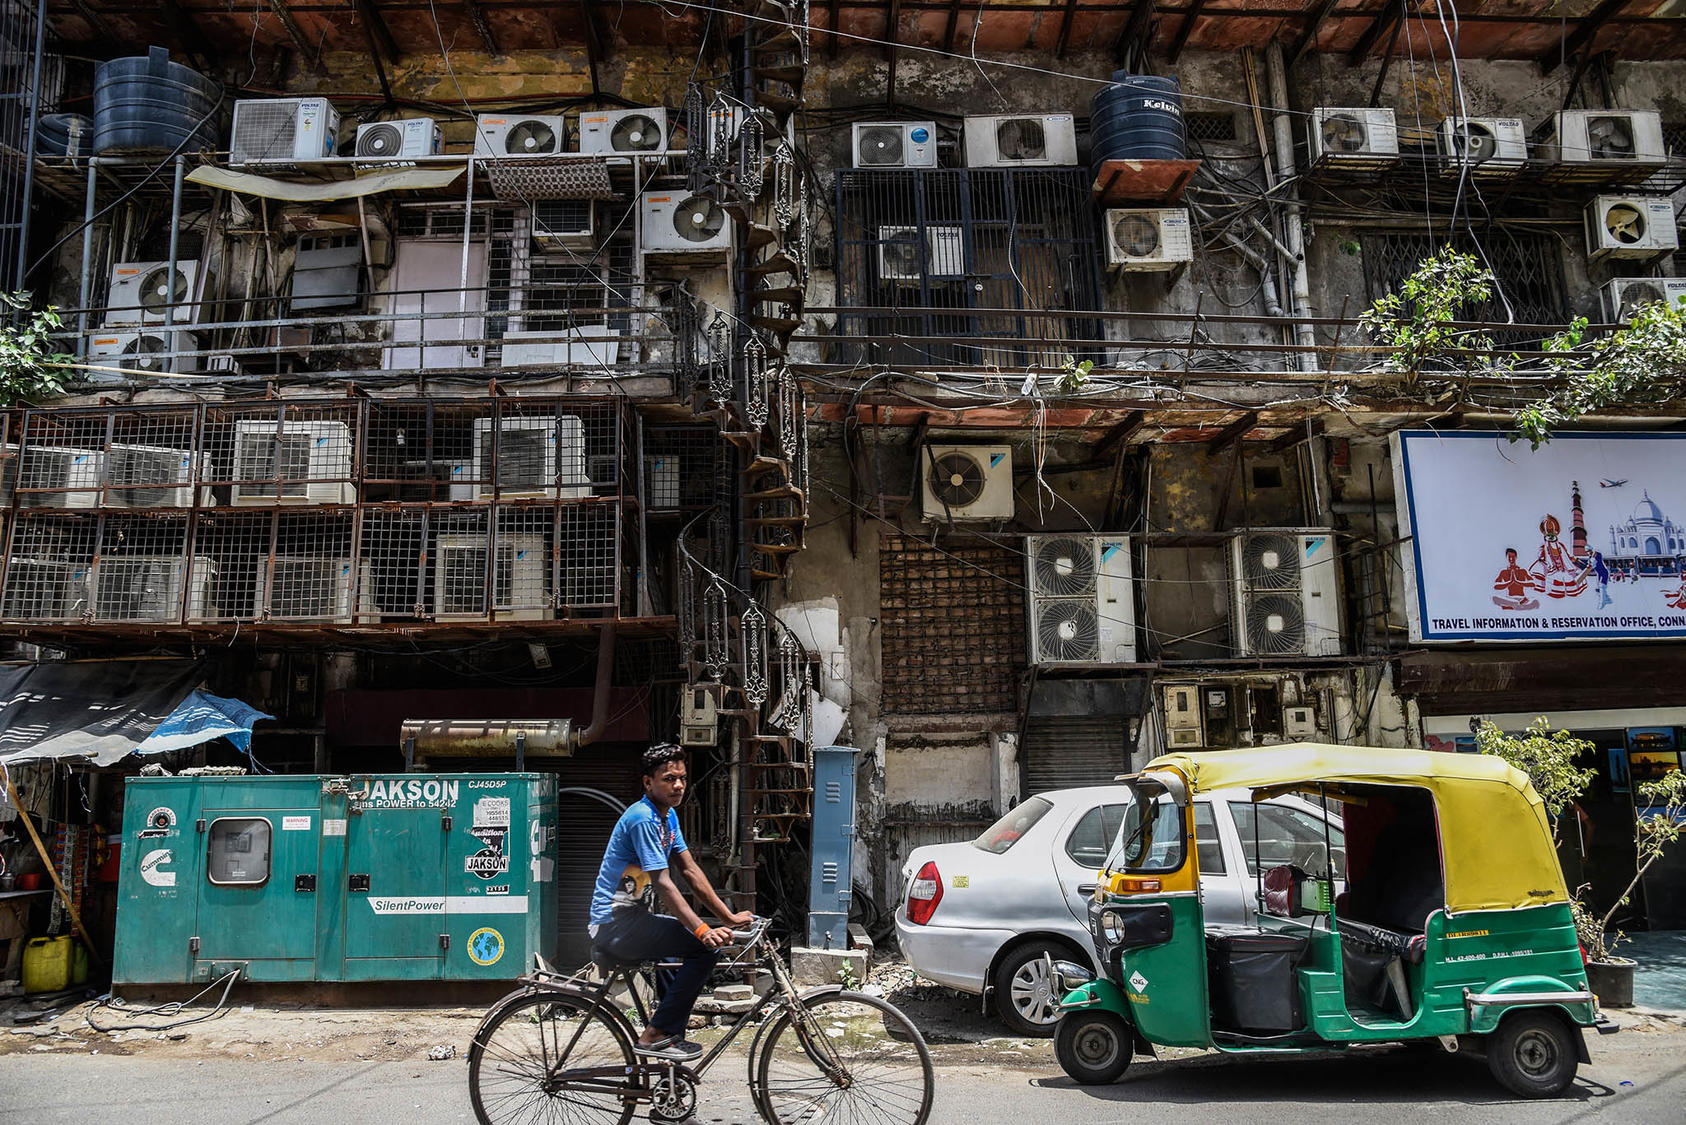 A man cycles past a facade with rows of air conditioners on a hot summer afternoon in New Delhi, Indian. In parts of Asia, temperatures and humidity levels are rising to levels that the human body can’t tolerate. (Saumya Khandelwal/The New York Times)